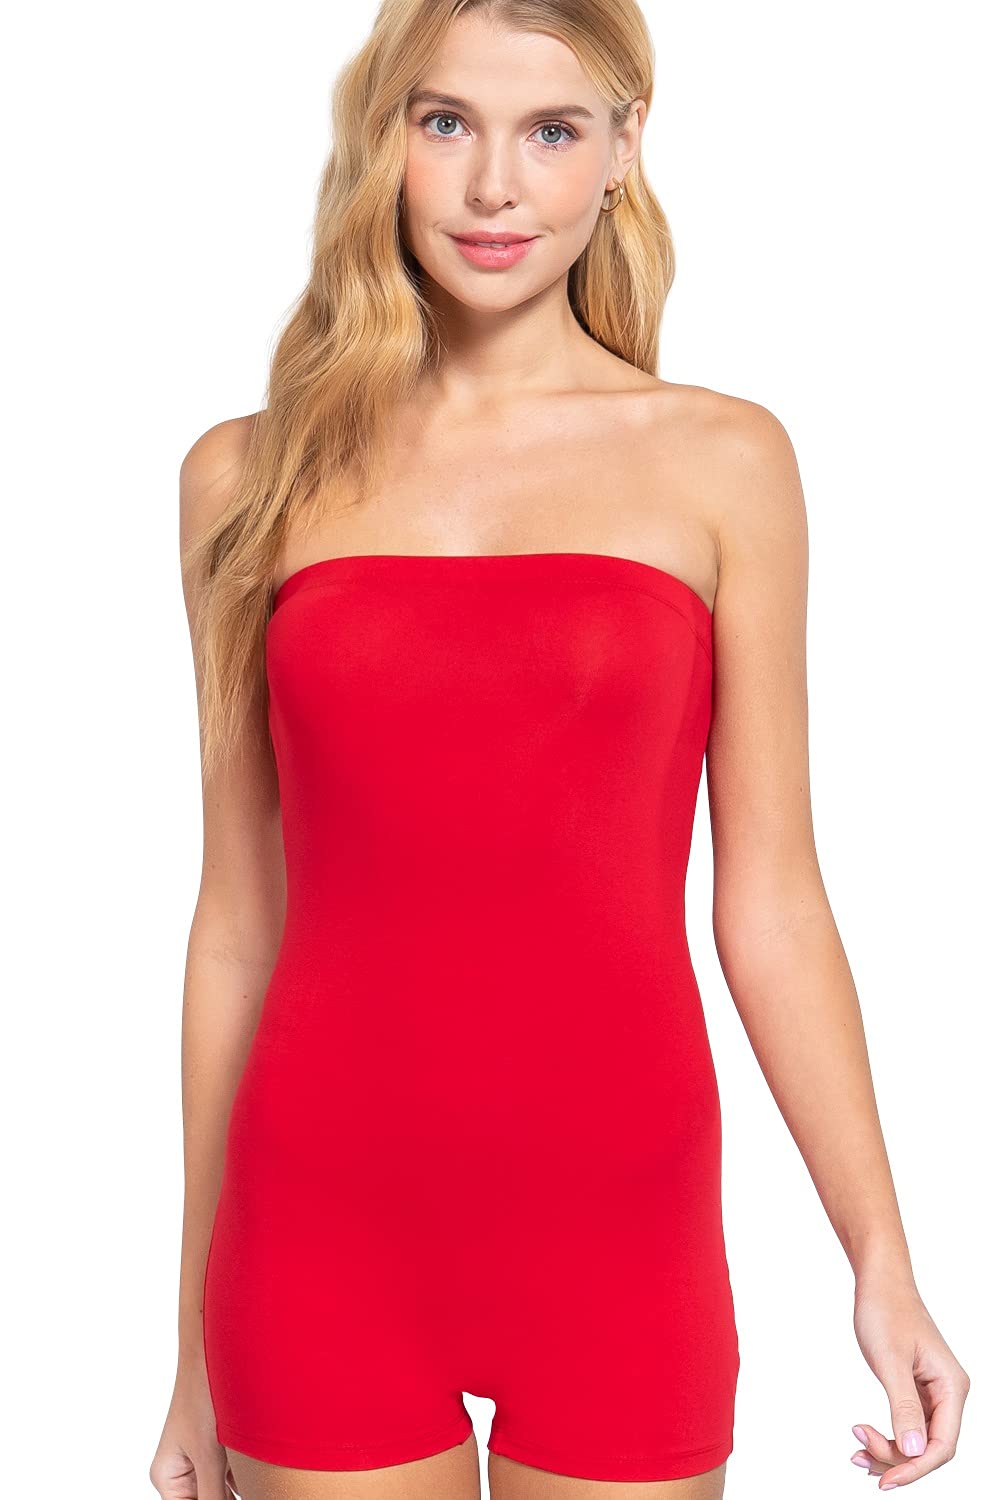  Red Bodysuit Catsuit For Women Strapless Jumpsuits